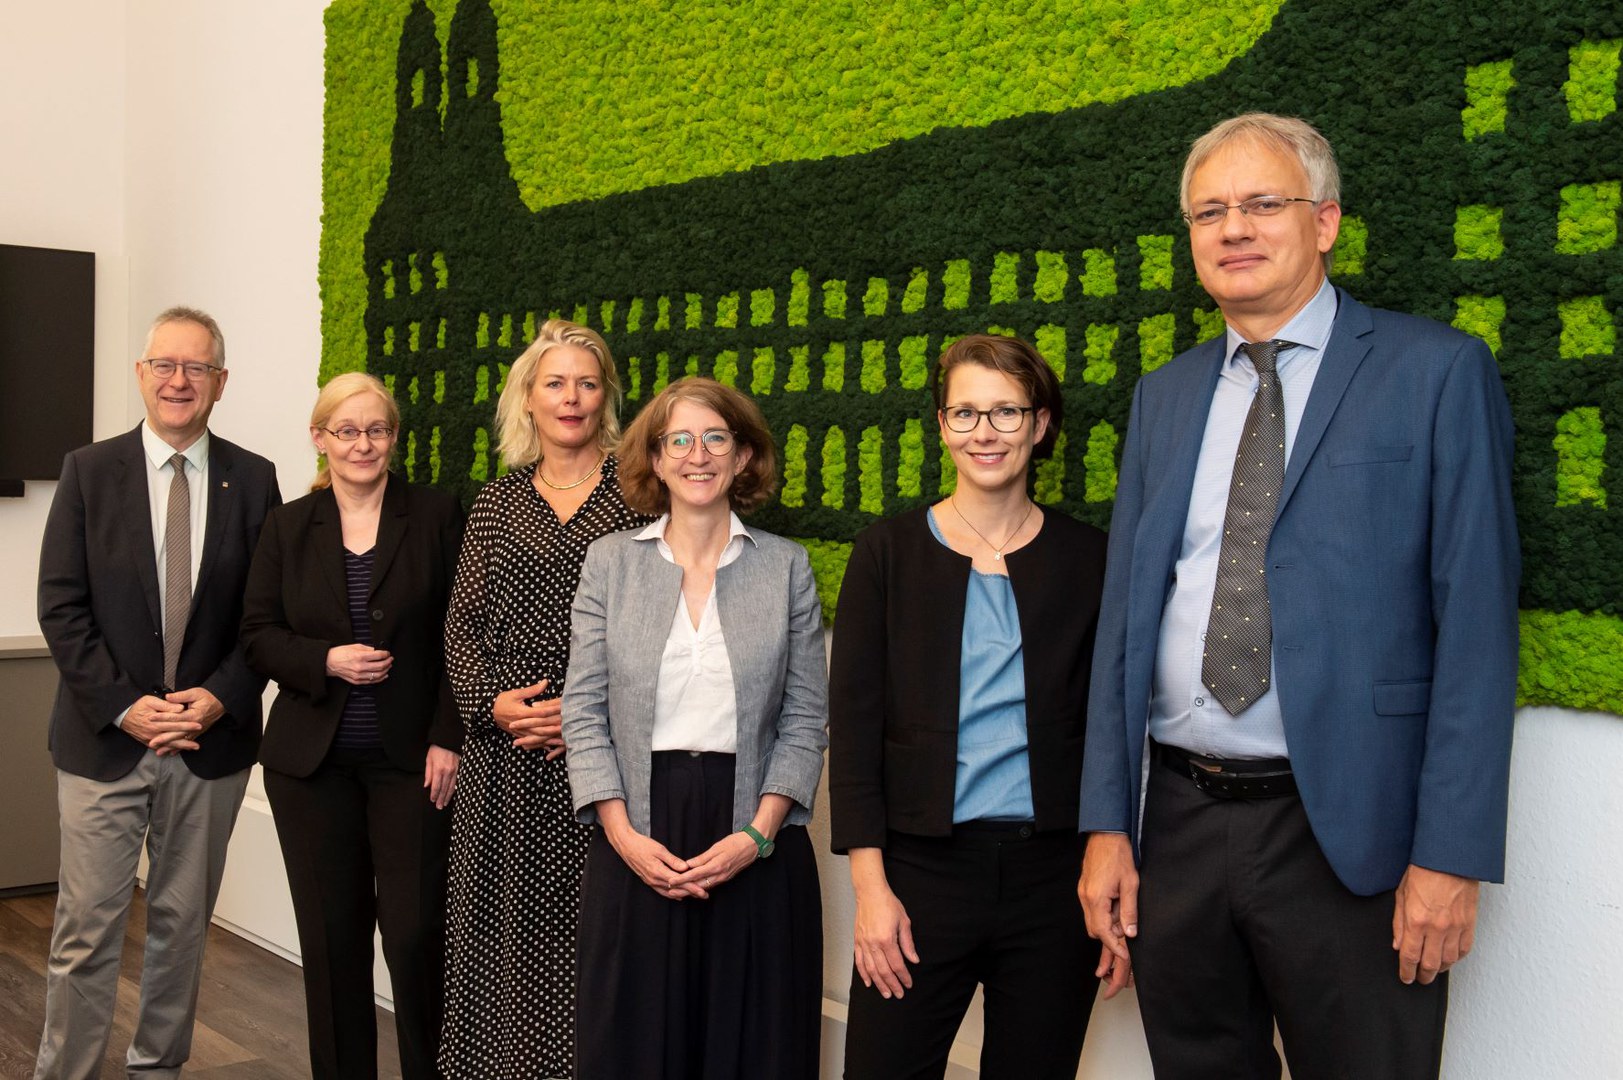 Rector Prof. Dr. Dr. h. c. Michael Hoch with BCDSS Co-Speaker Prof. Dr. Marion Gymnich and the appointees Prof. Dr. Claudia Jarzebowski, Prof. Dr. Julia Hillner, Prof. Dr. Pia Wiegmink and Prof. Dr. Christoph Witzenrath (from left)